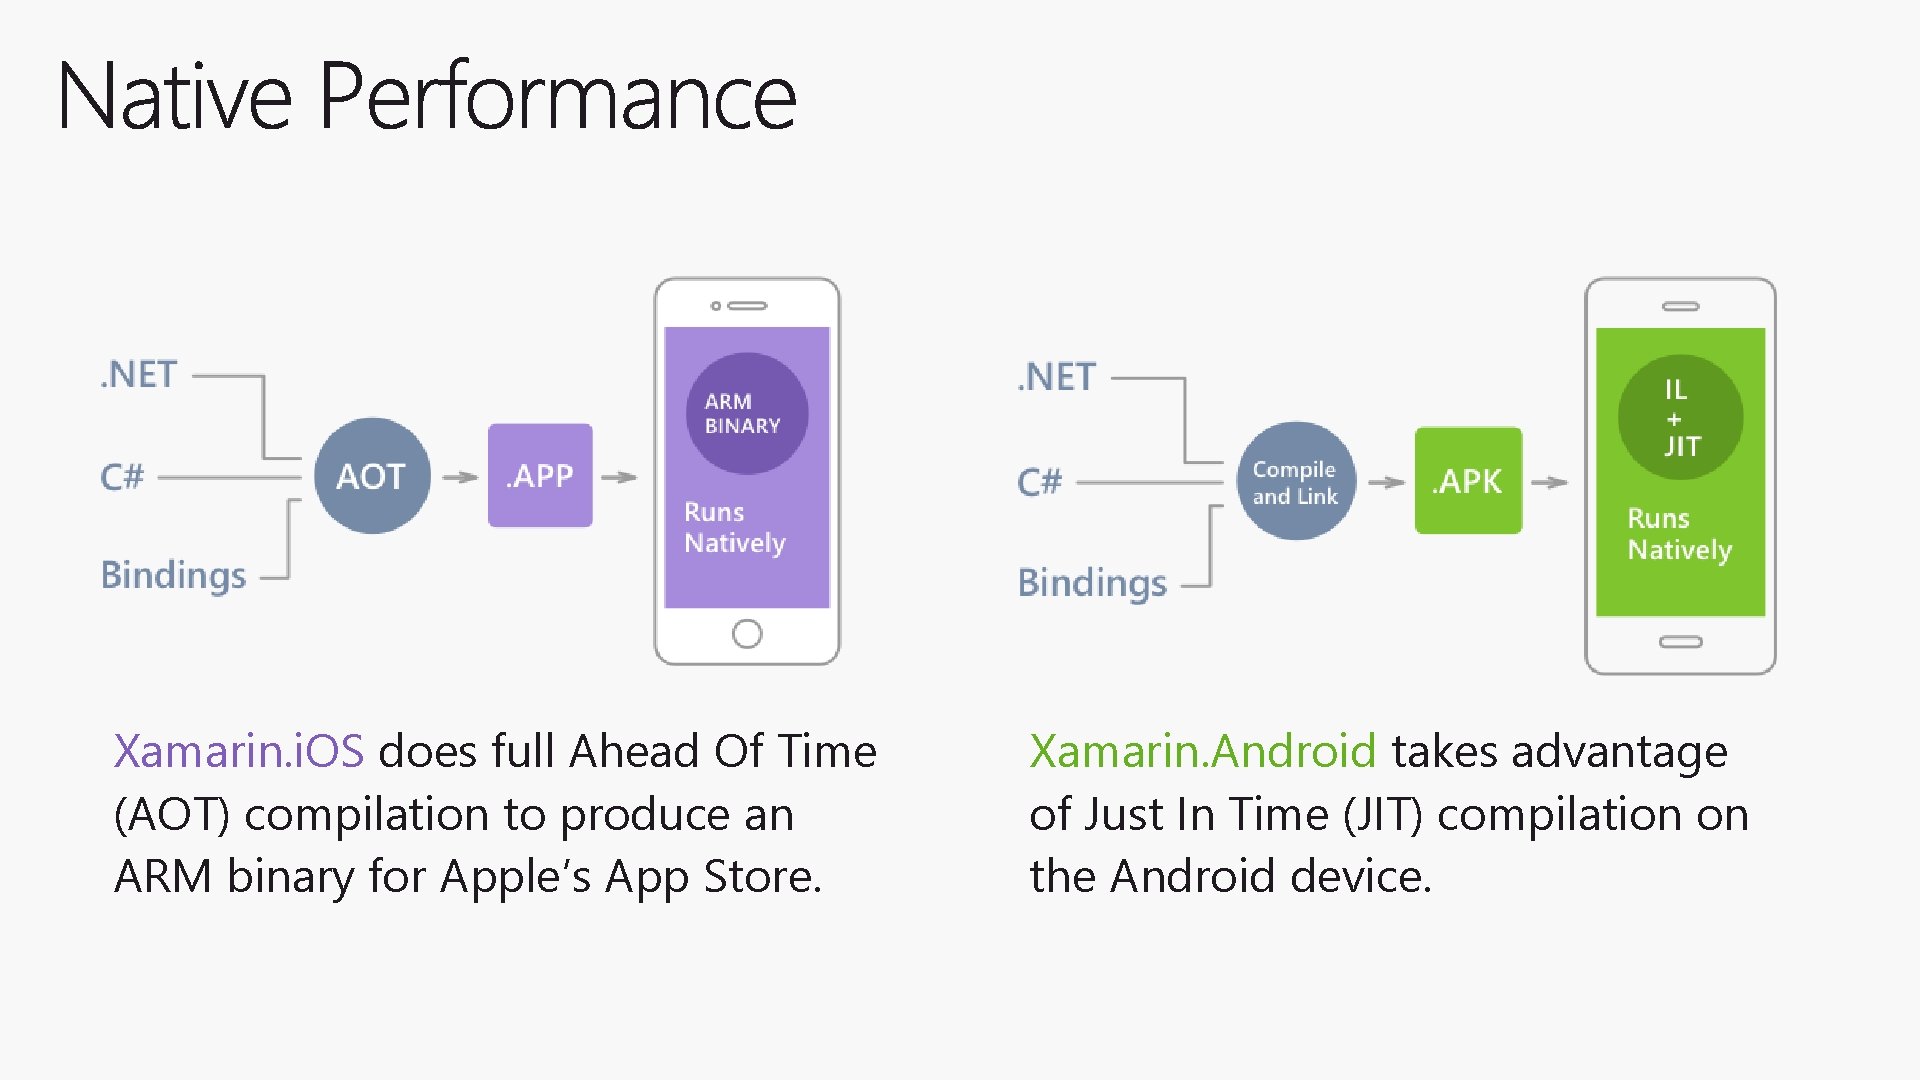 Xamarin. i. OS does full Ahead Of Time (AOT) compilation to produce an ARM